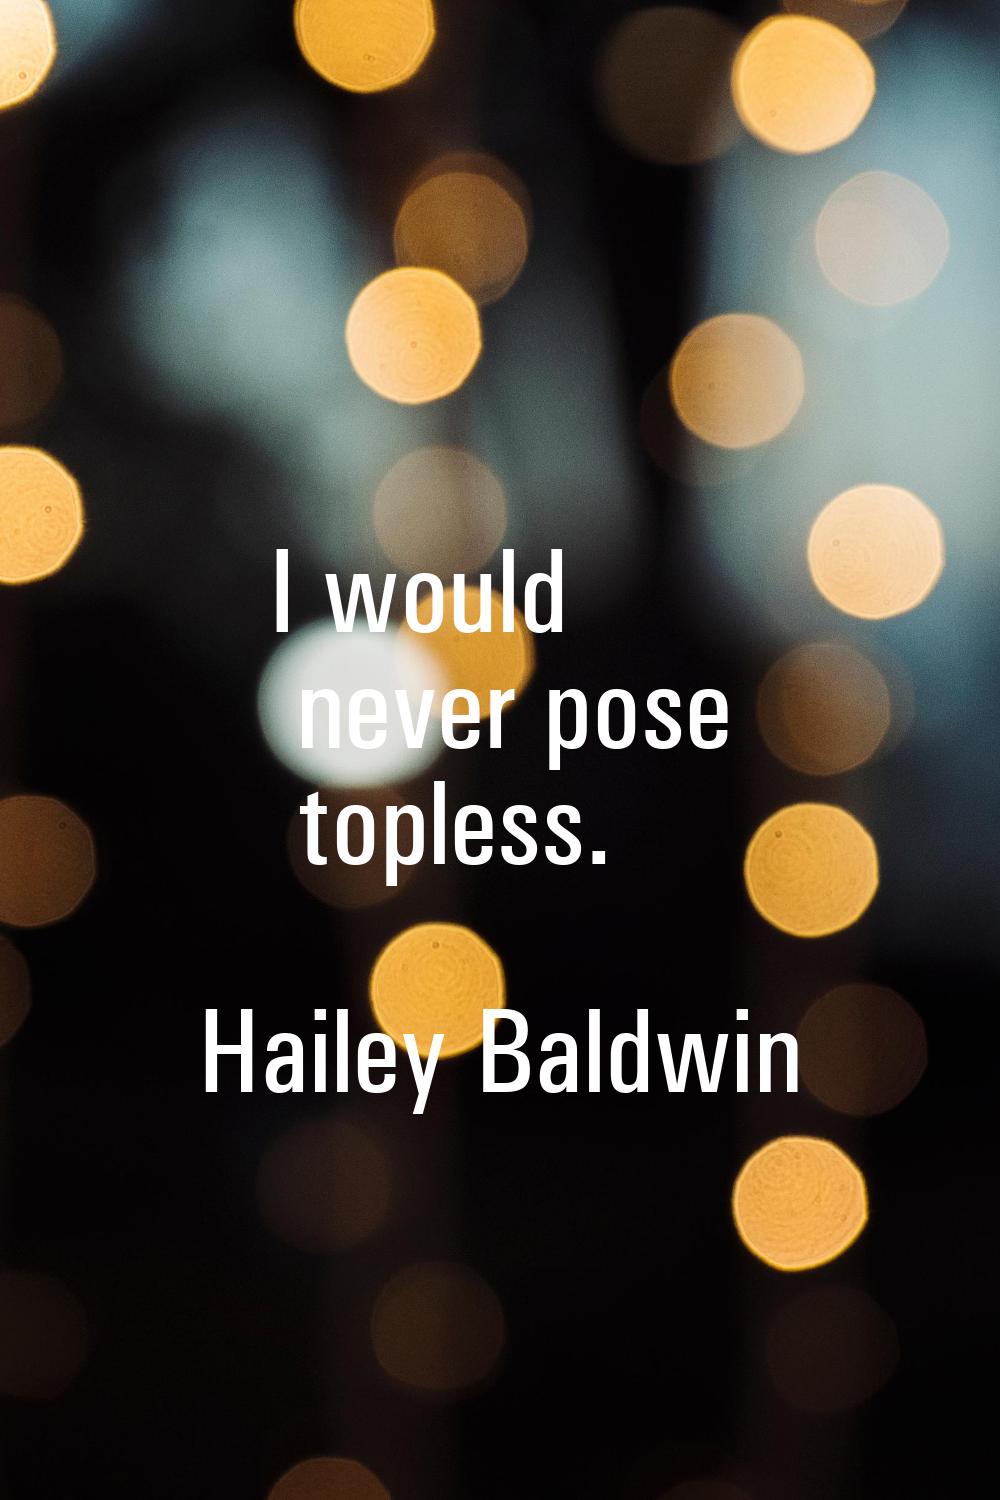 I would never pose topless.